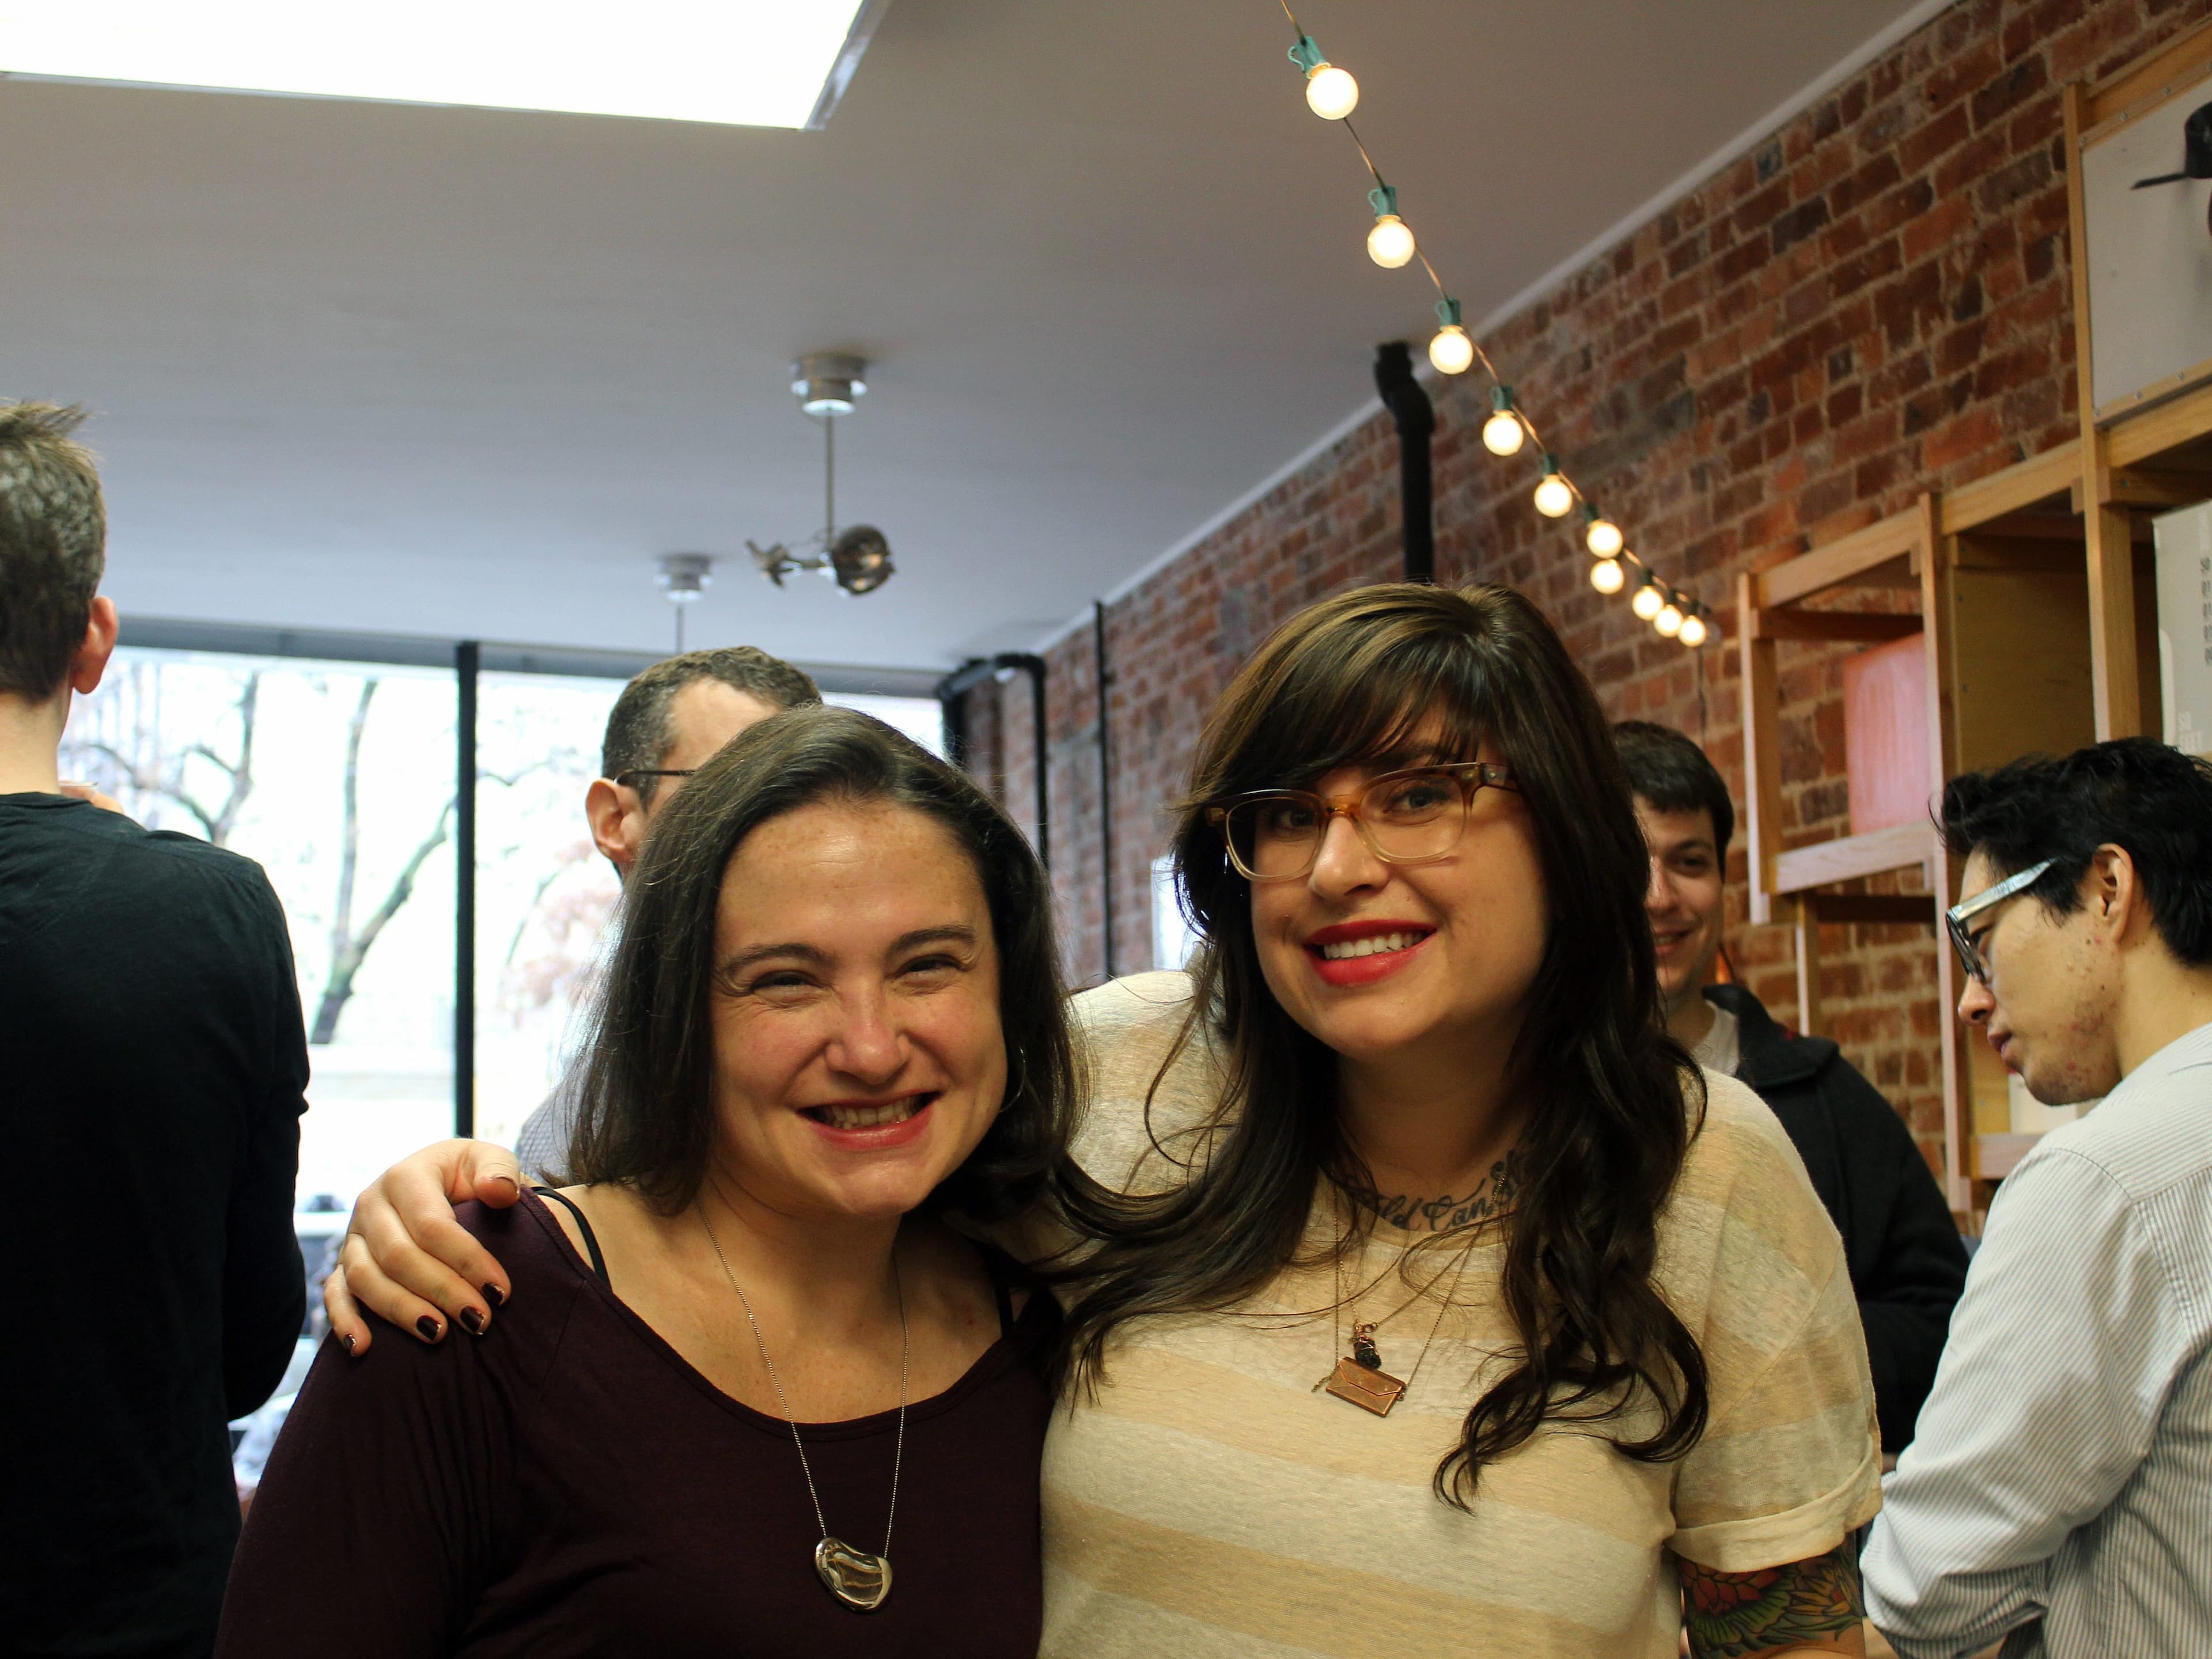 Two women are smiling at the camera with their arms around each other in a room with exposed brick walls. Other people are seen in the background, engaging in conversation. The ceiling has string lights hanging down, and there's a large window letting in natural light.